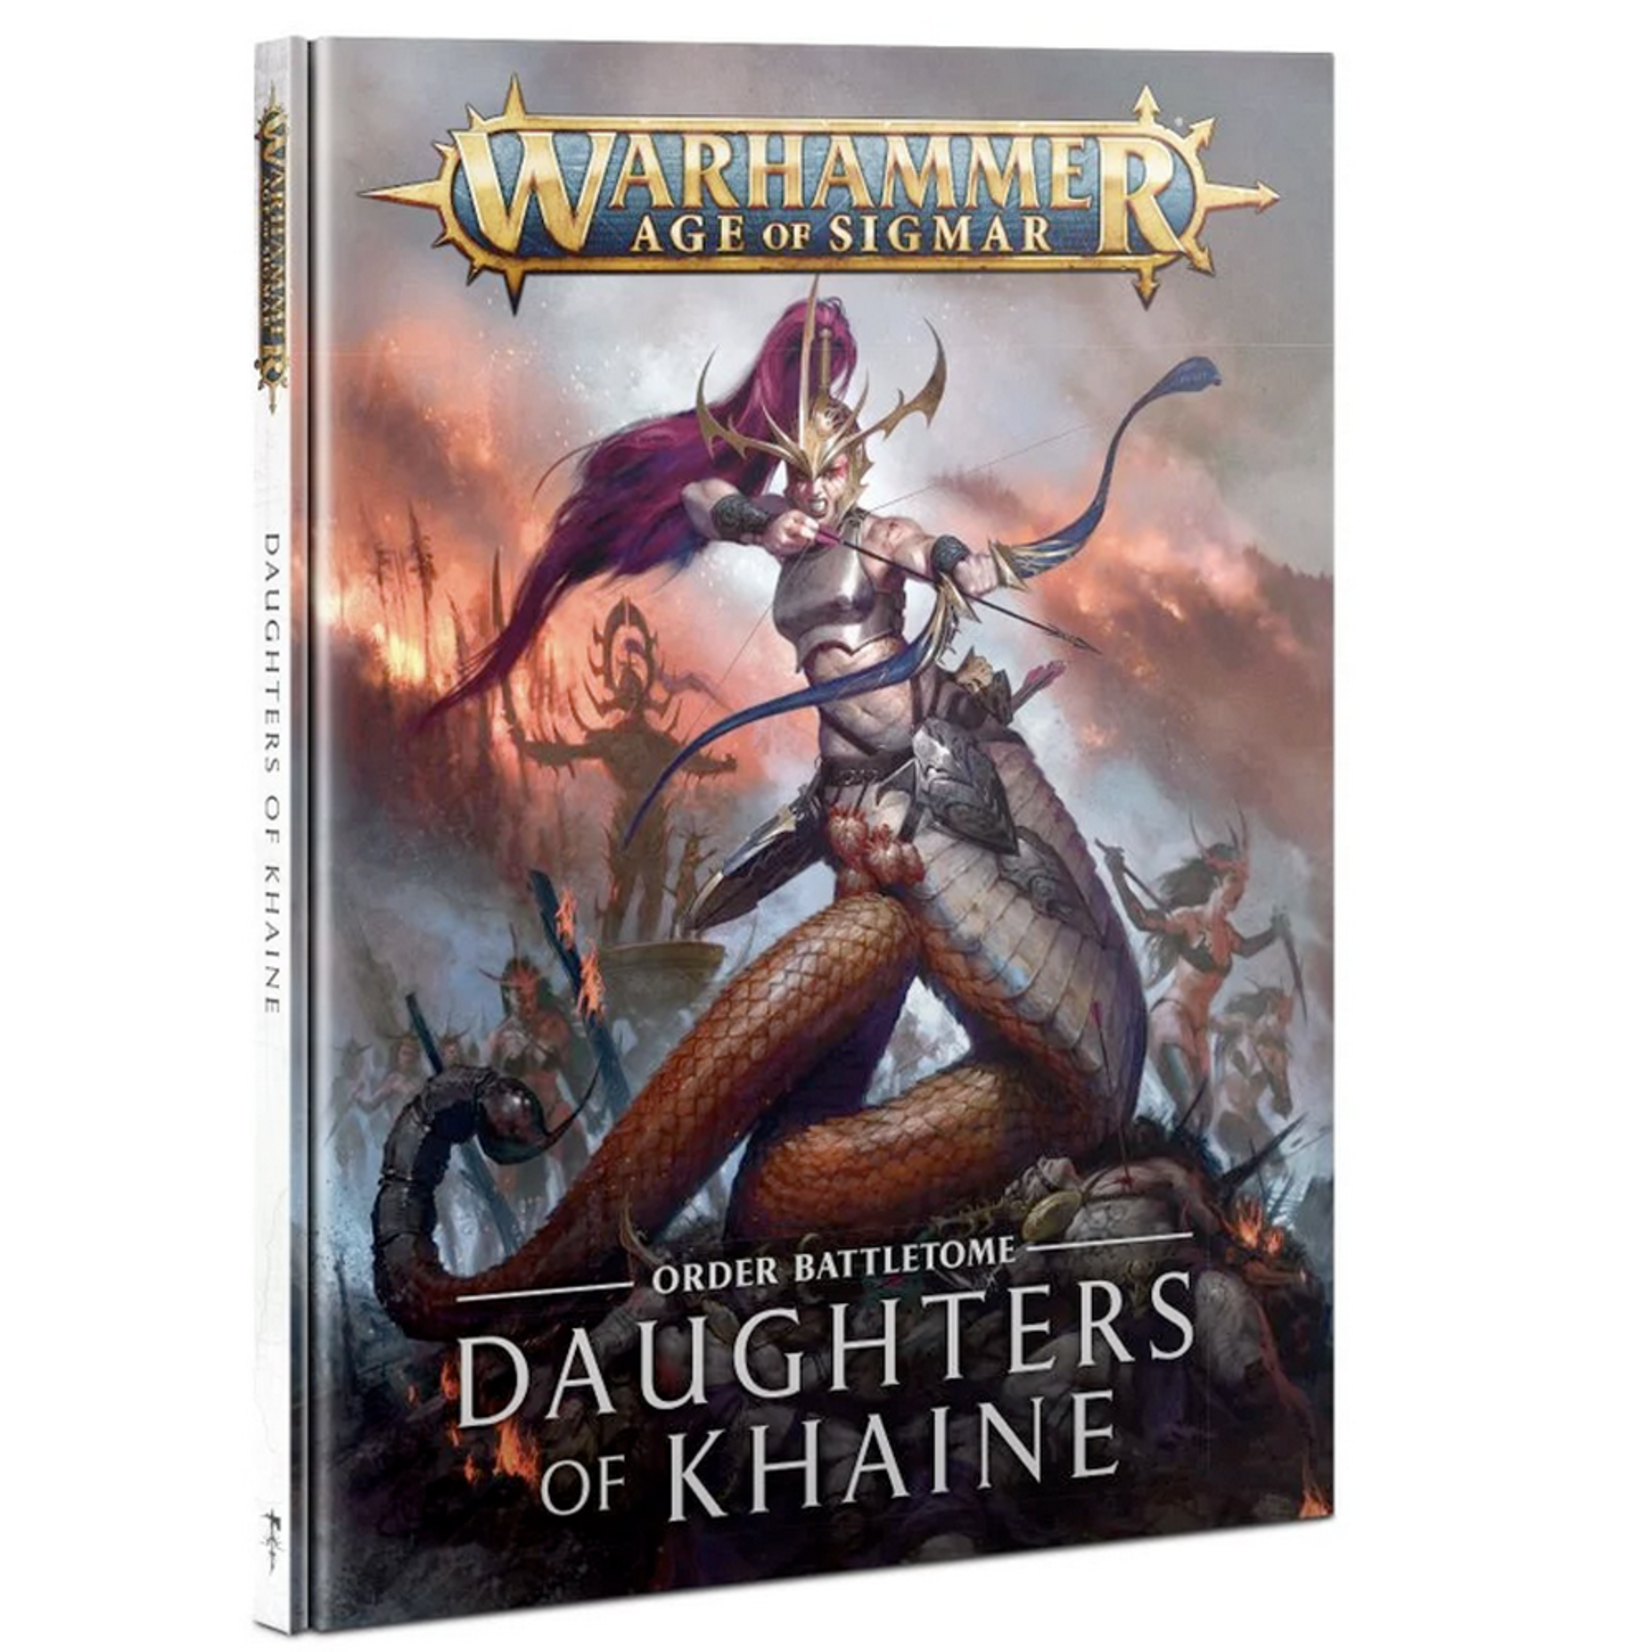 Battletome - Daughters of Khaine (AOS)